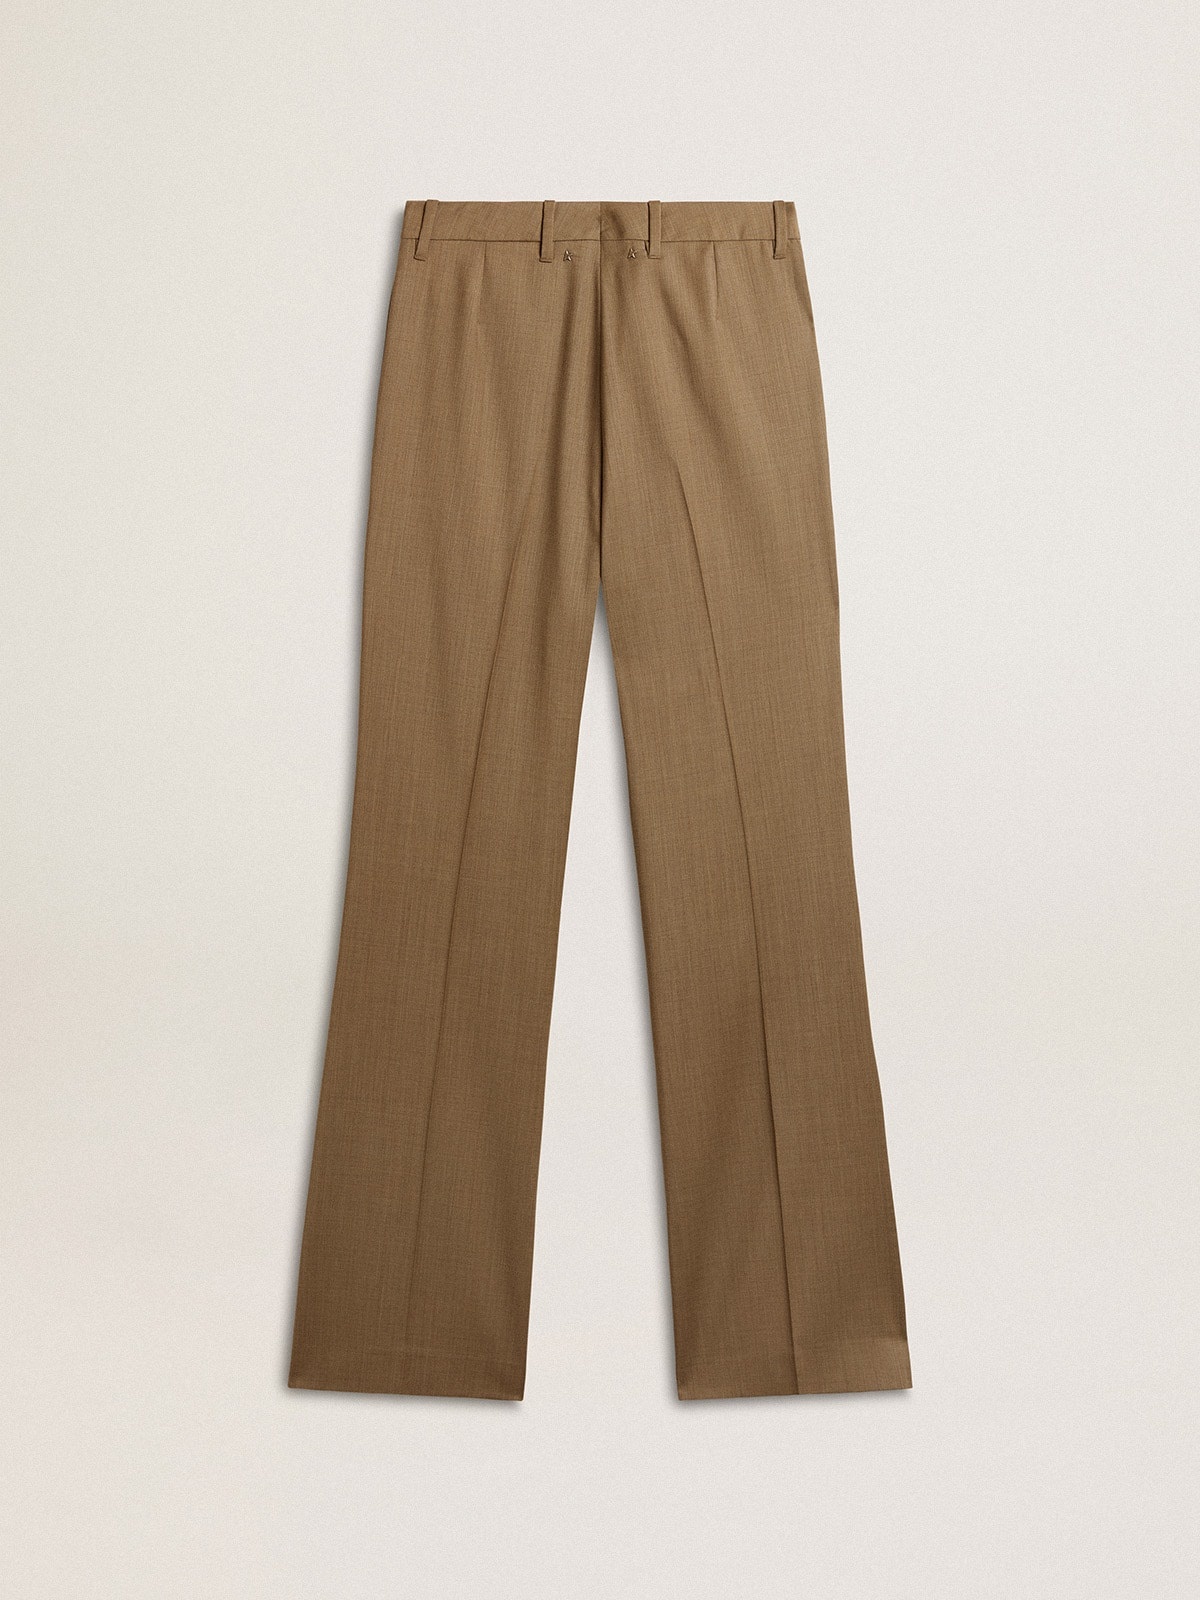 Women's pants in dove-gray tailored wool fabric - 5